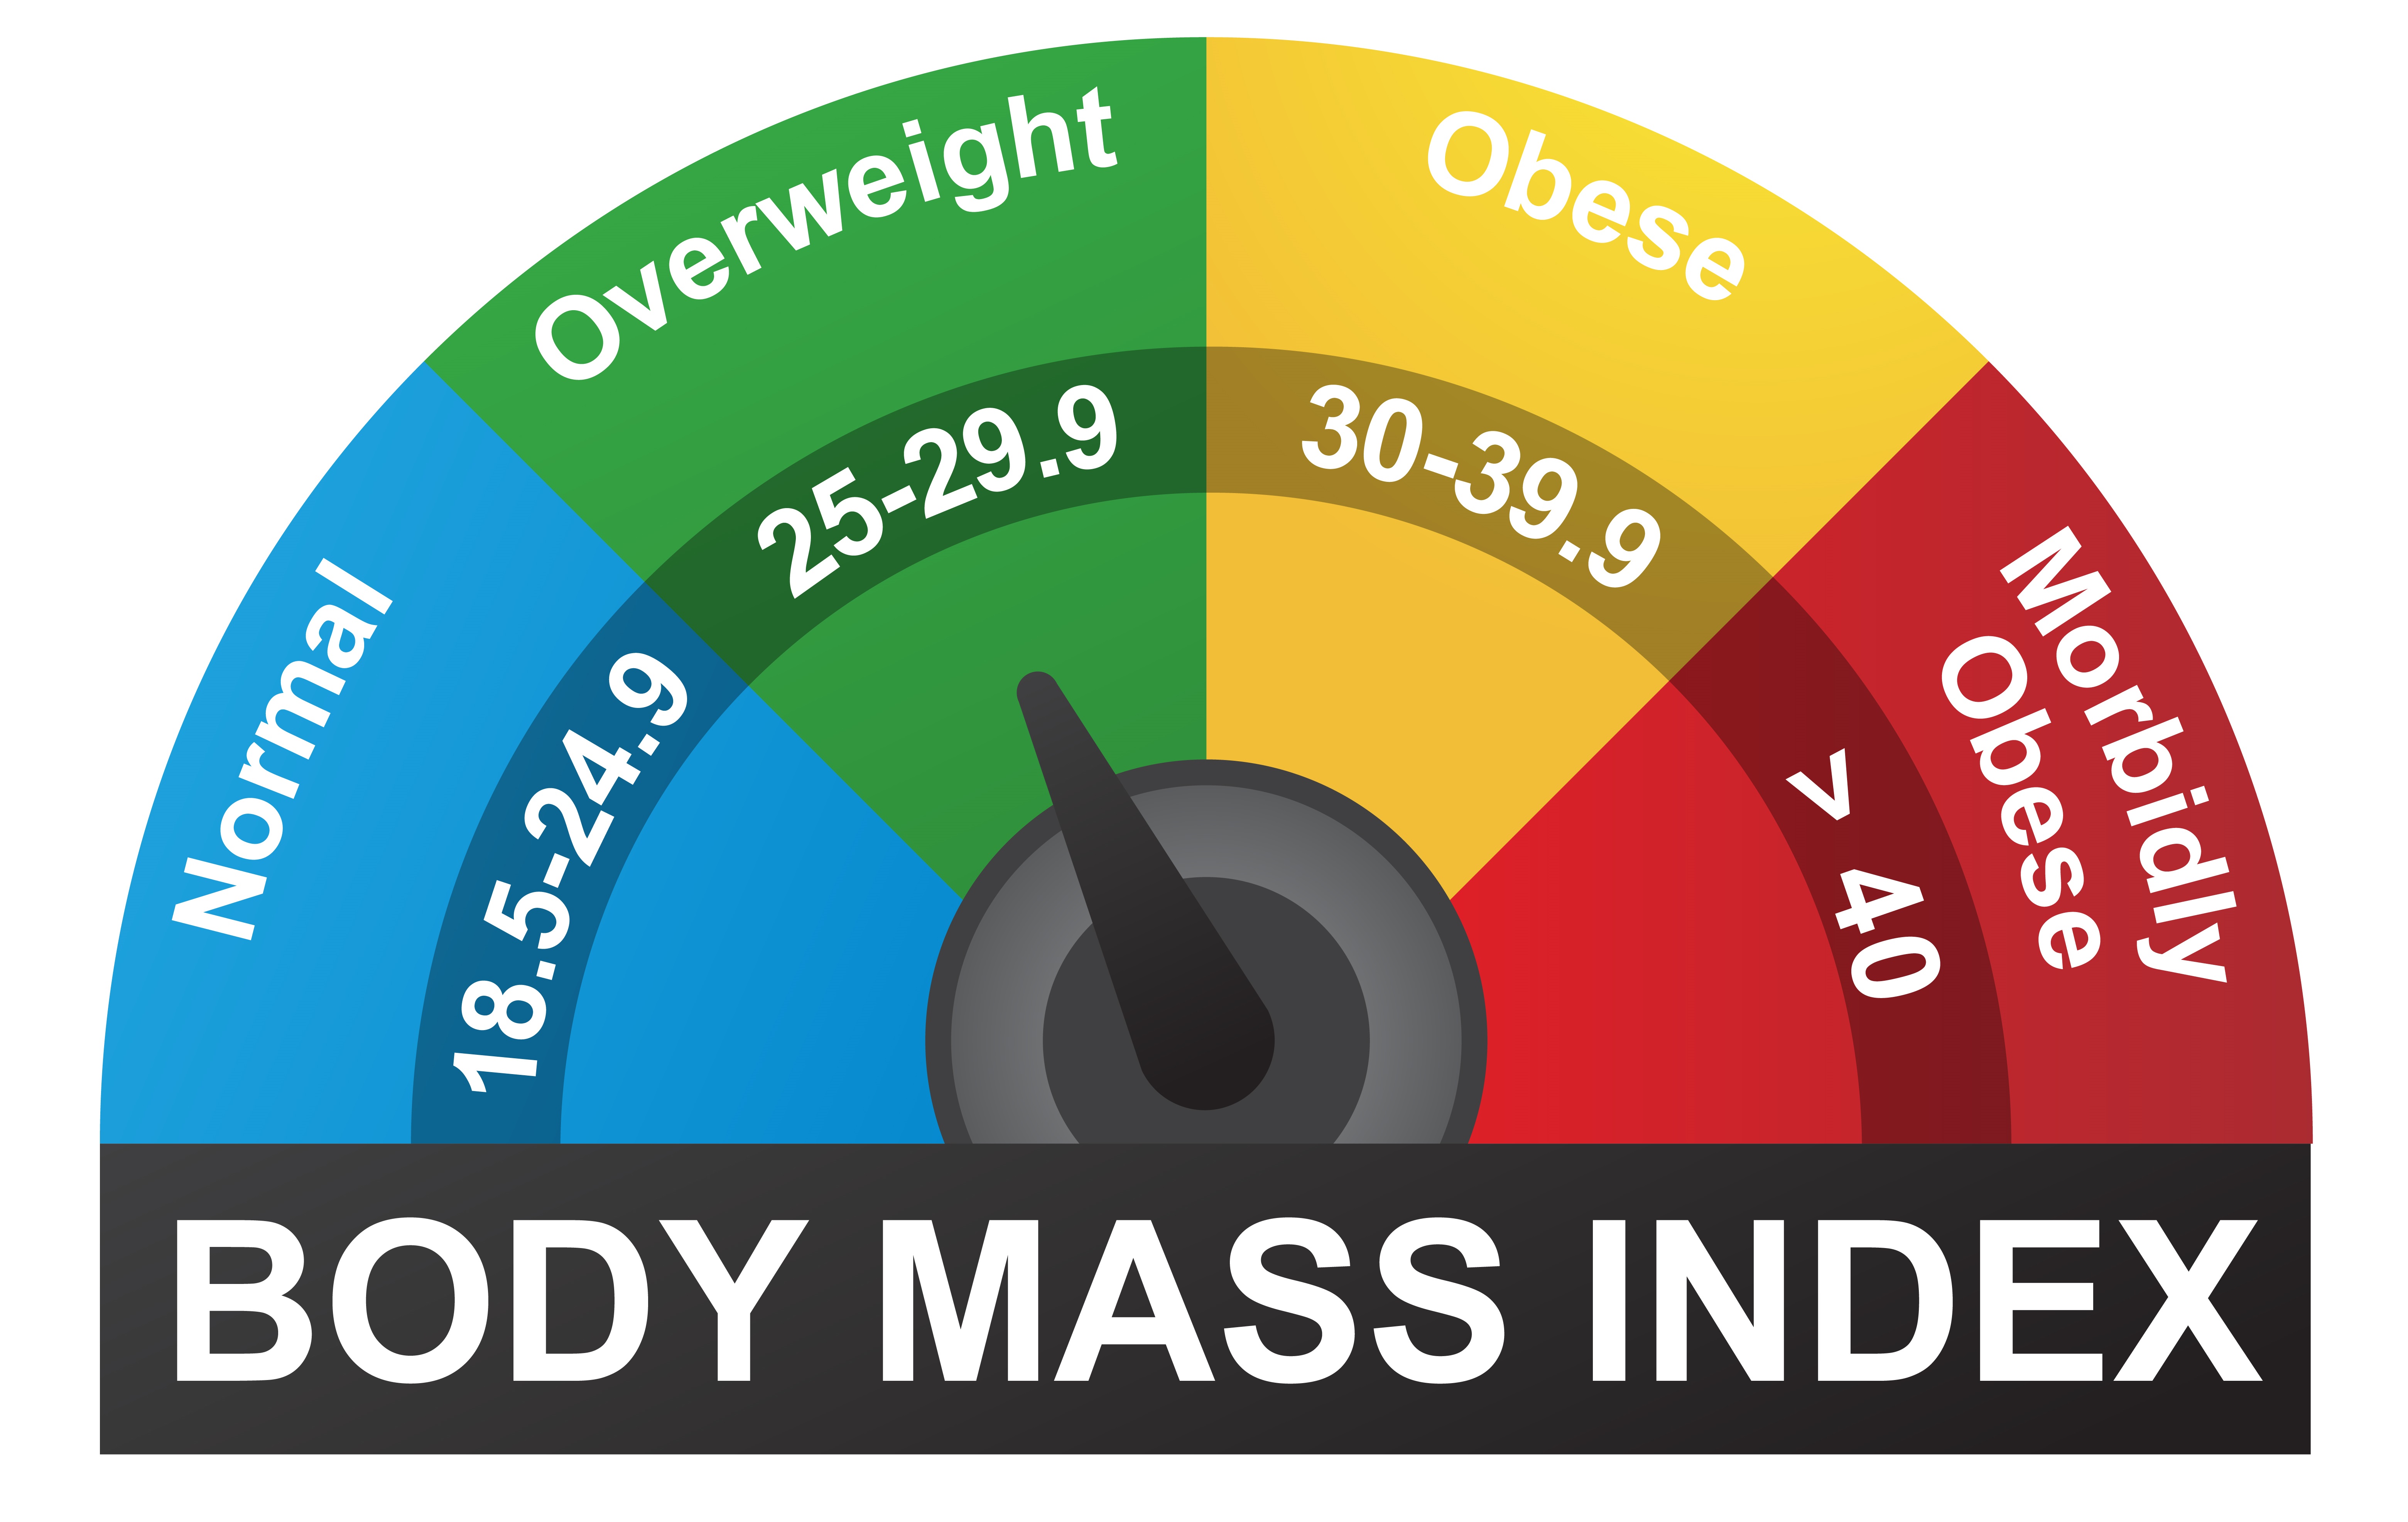 The BMI uses a rating scale to determine obesity levels